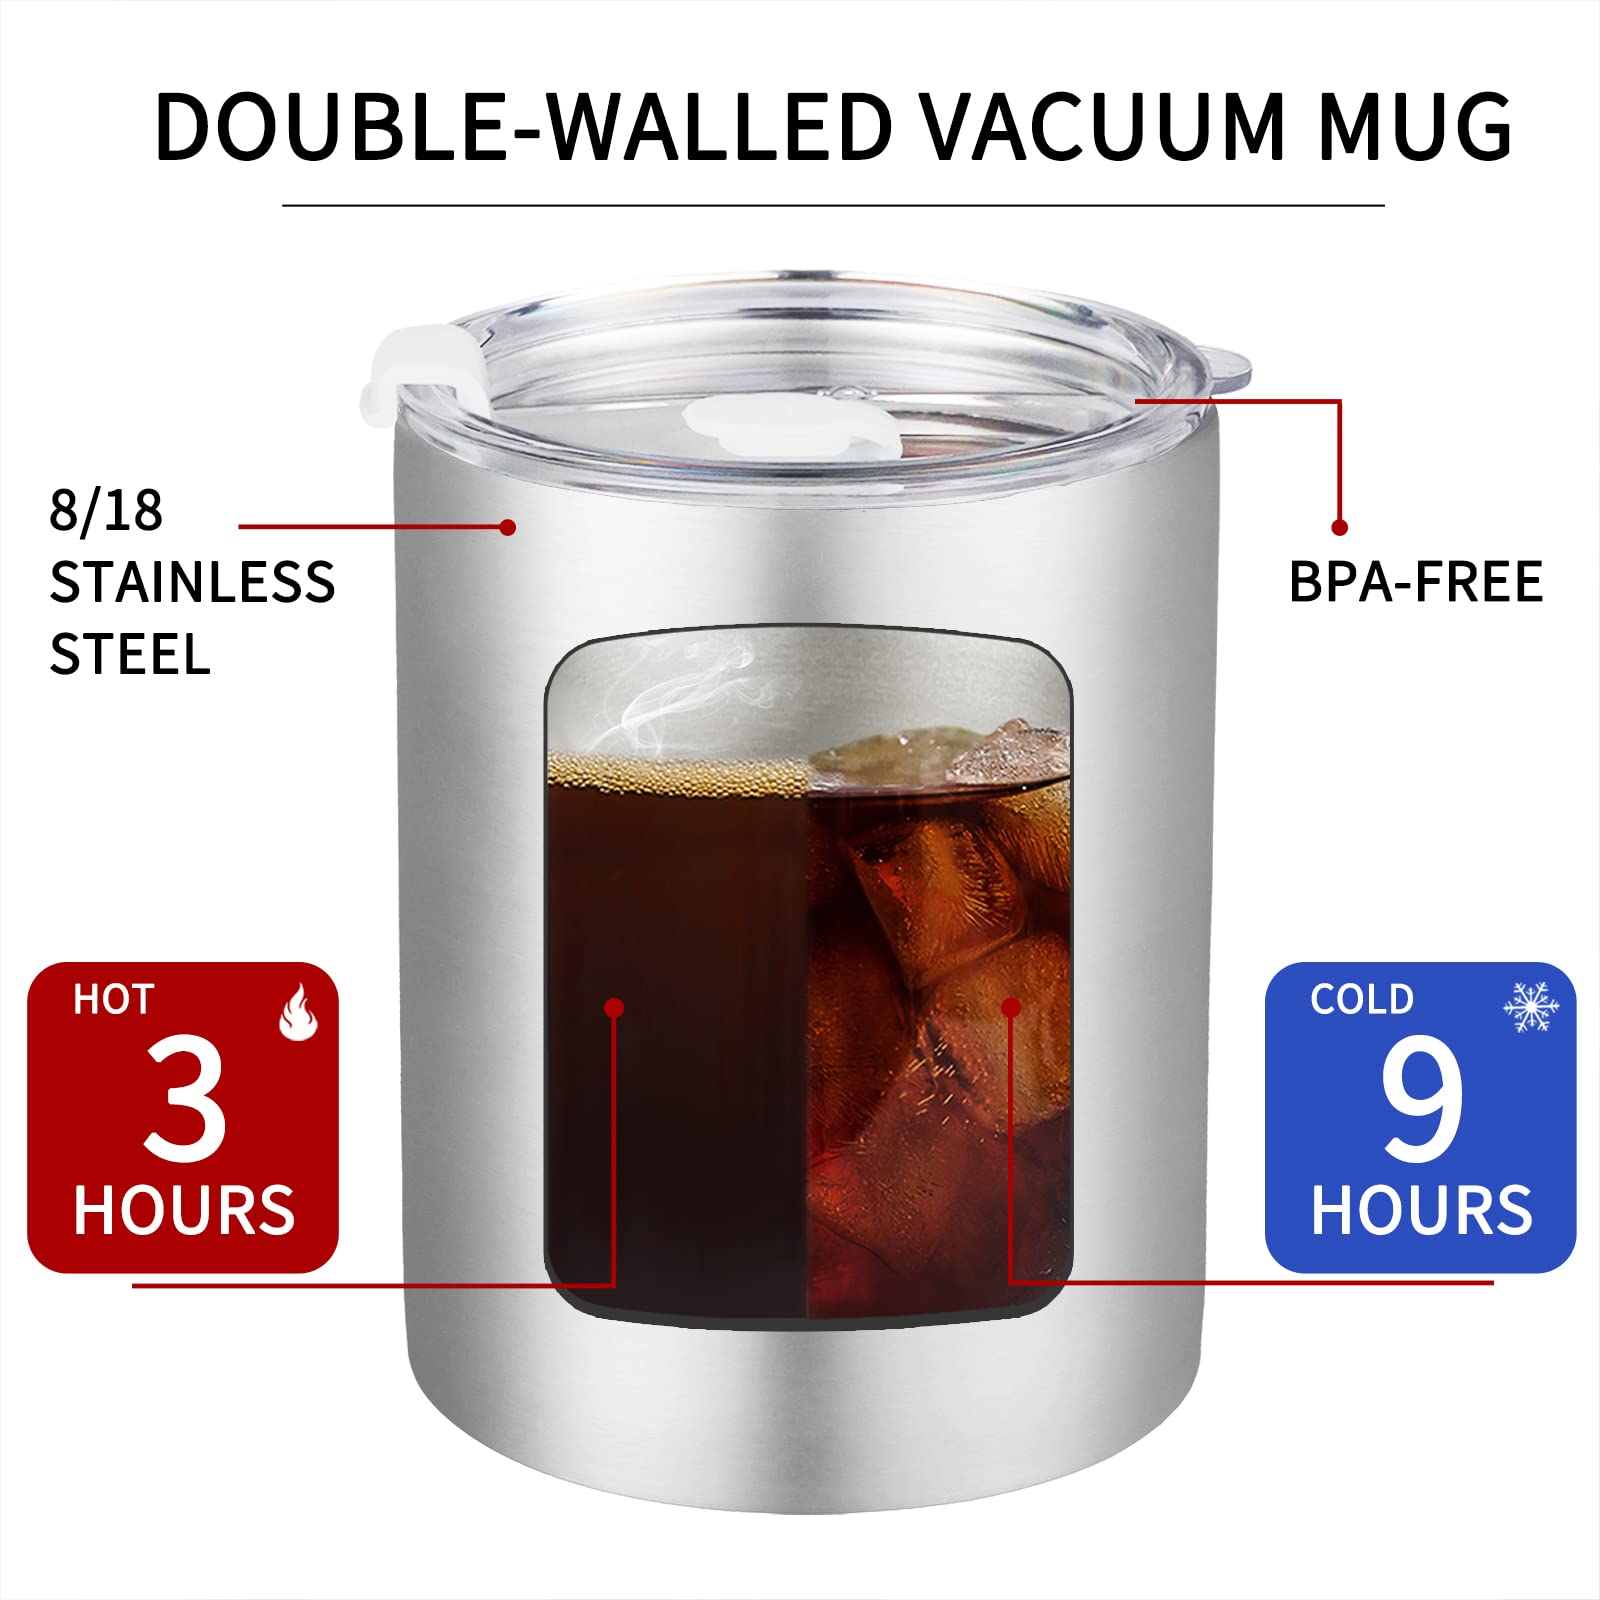 Puraville 12 oz Handleless Coffee Mug,Insulated Travel Mug with Lid and Straw, Double-Walled Stainless Steel Vacuum Coffee Tumbler Cup with lid, Silver